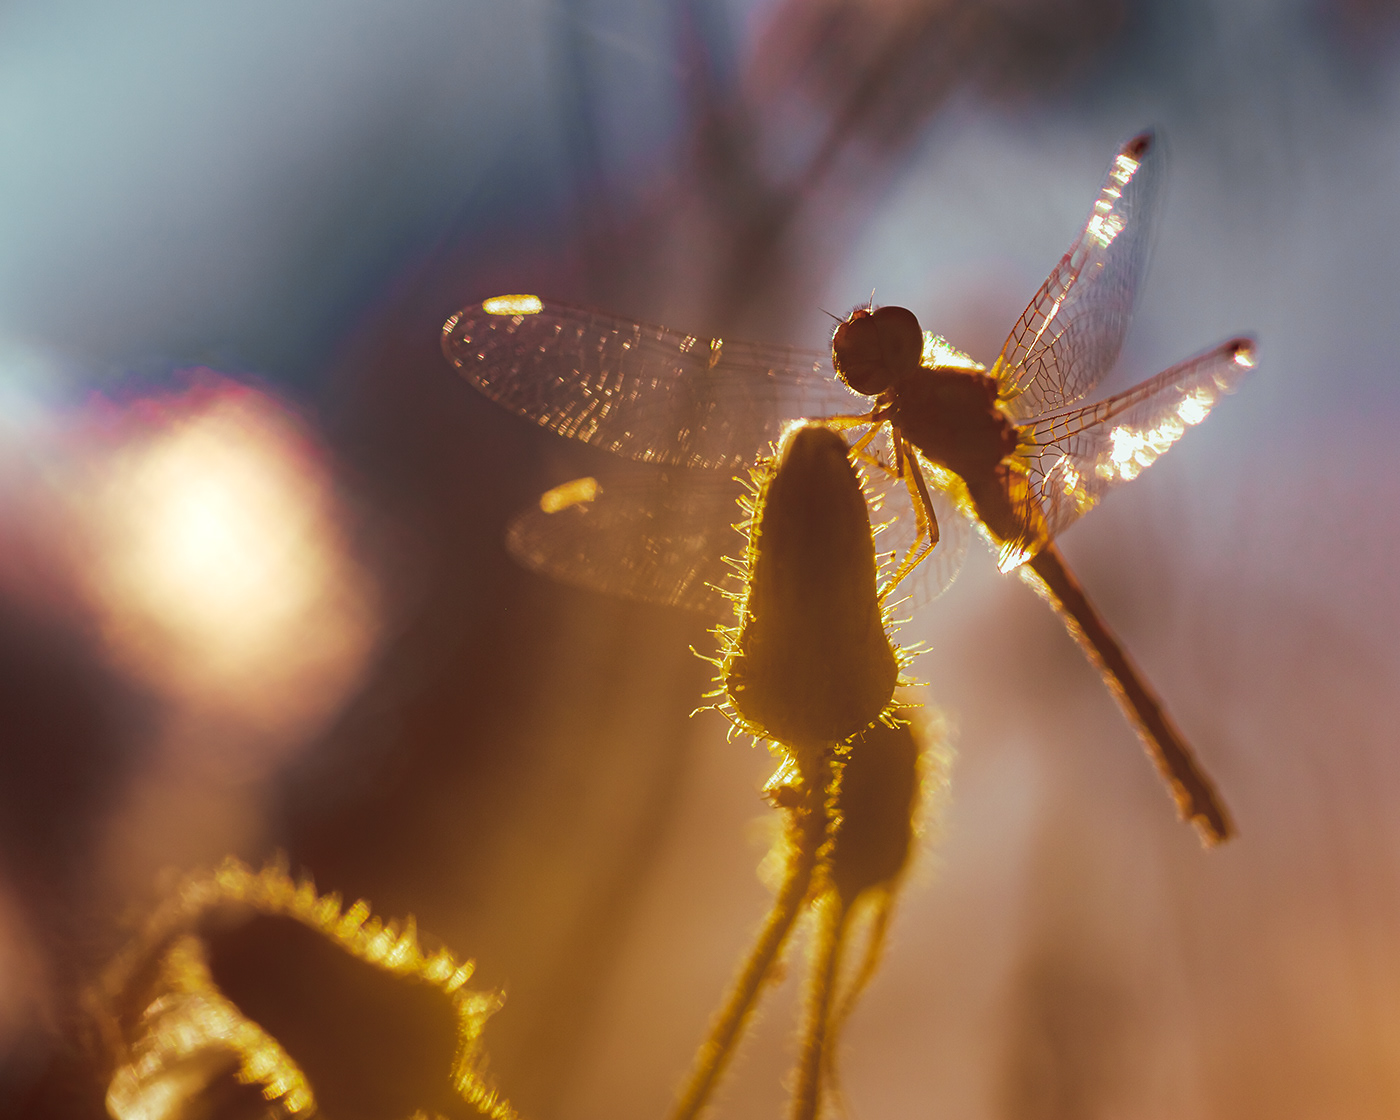 A dragonfly rests on a dandelion bud in the early morning sun.